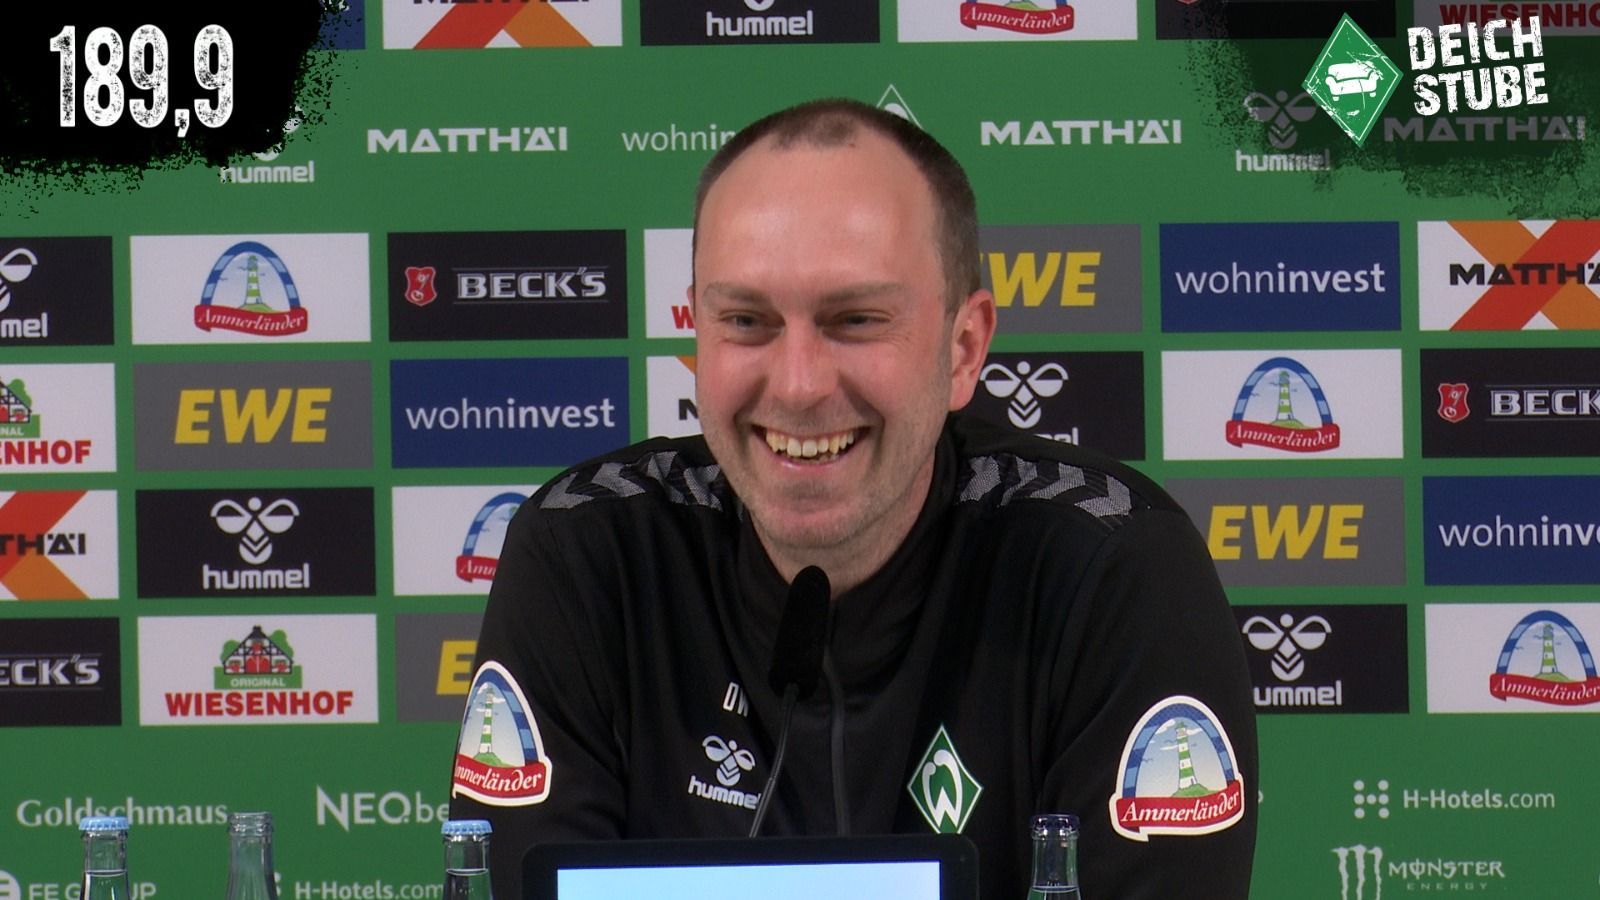 Before Werder Bremen vs FC Augsburg: The highlights of the press conference in 189.9 seconds!